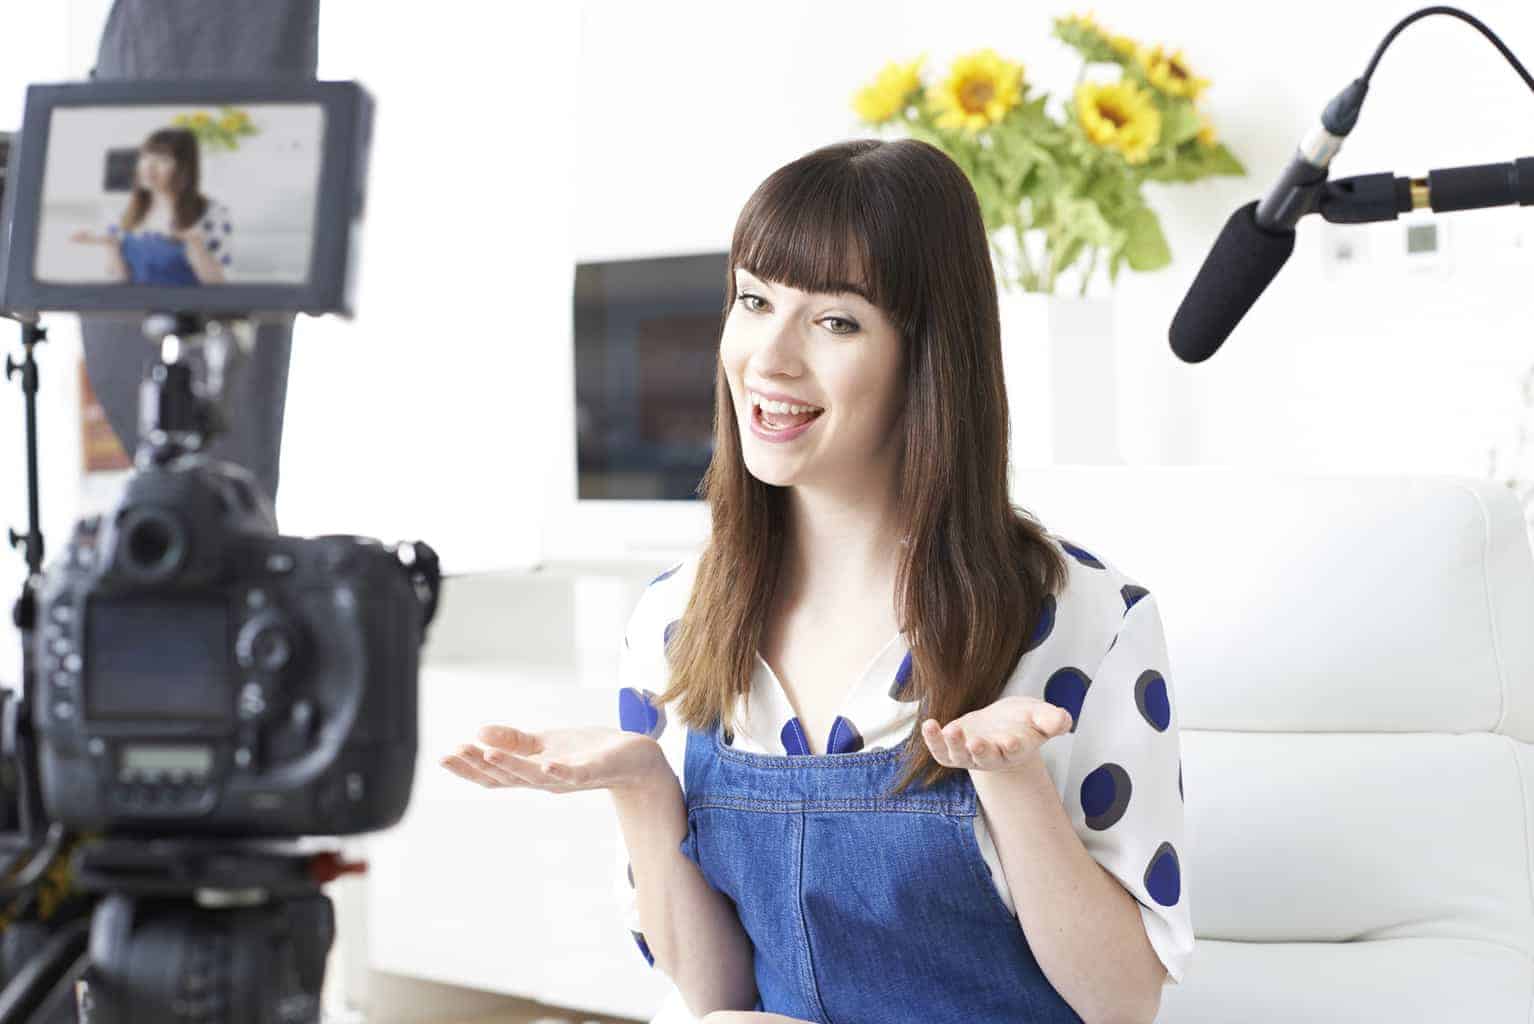 The Secret to a Promo Video That Converts Viewers